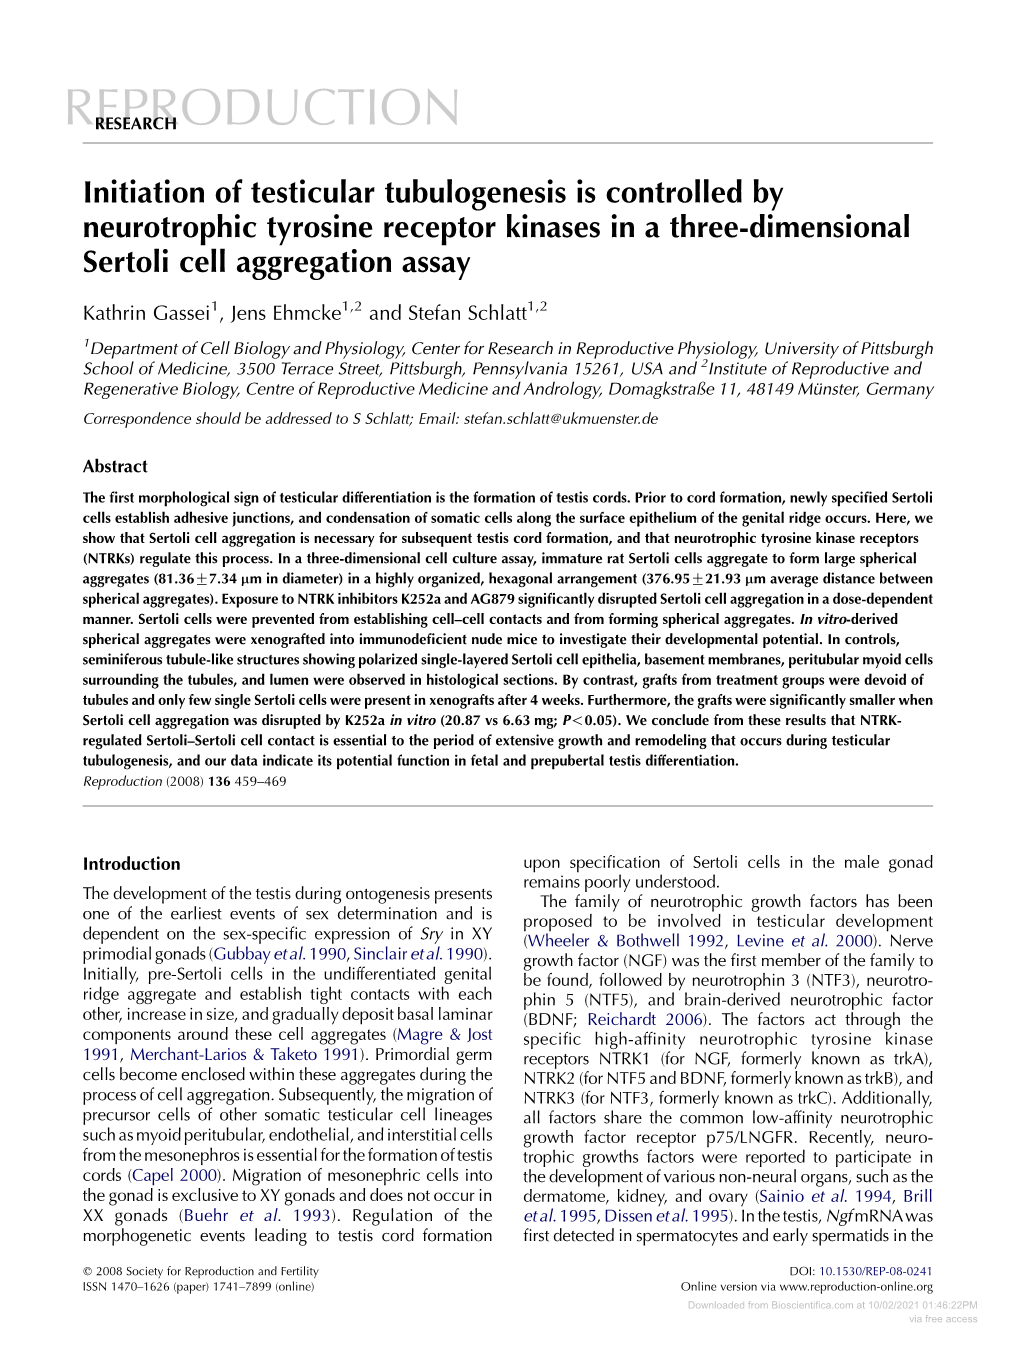 Effects of in Vivo Administration of Epidermal Growth Factor (EGF) On